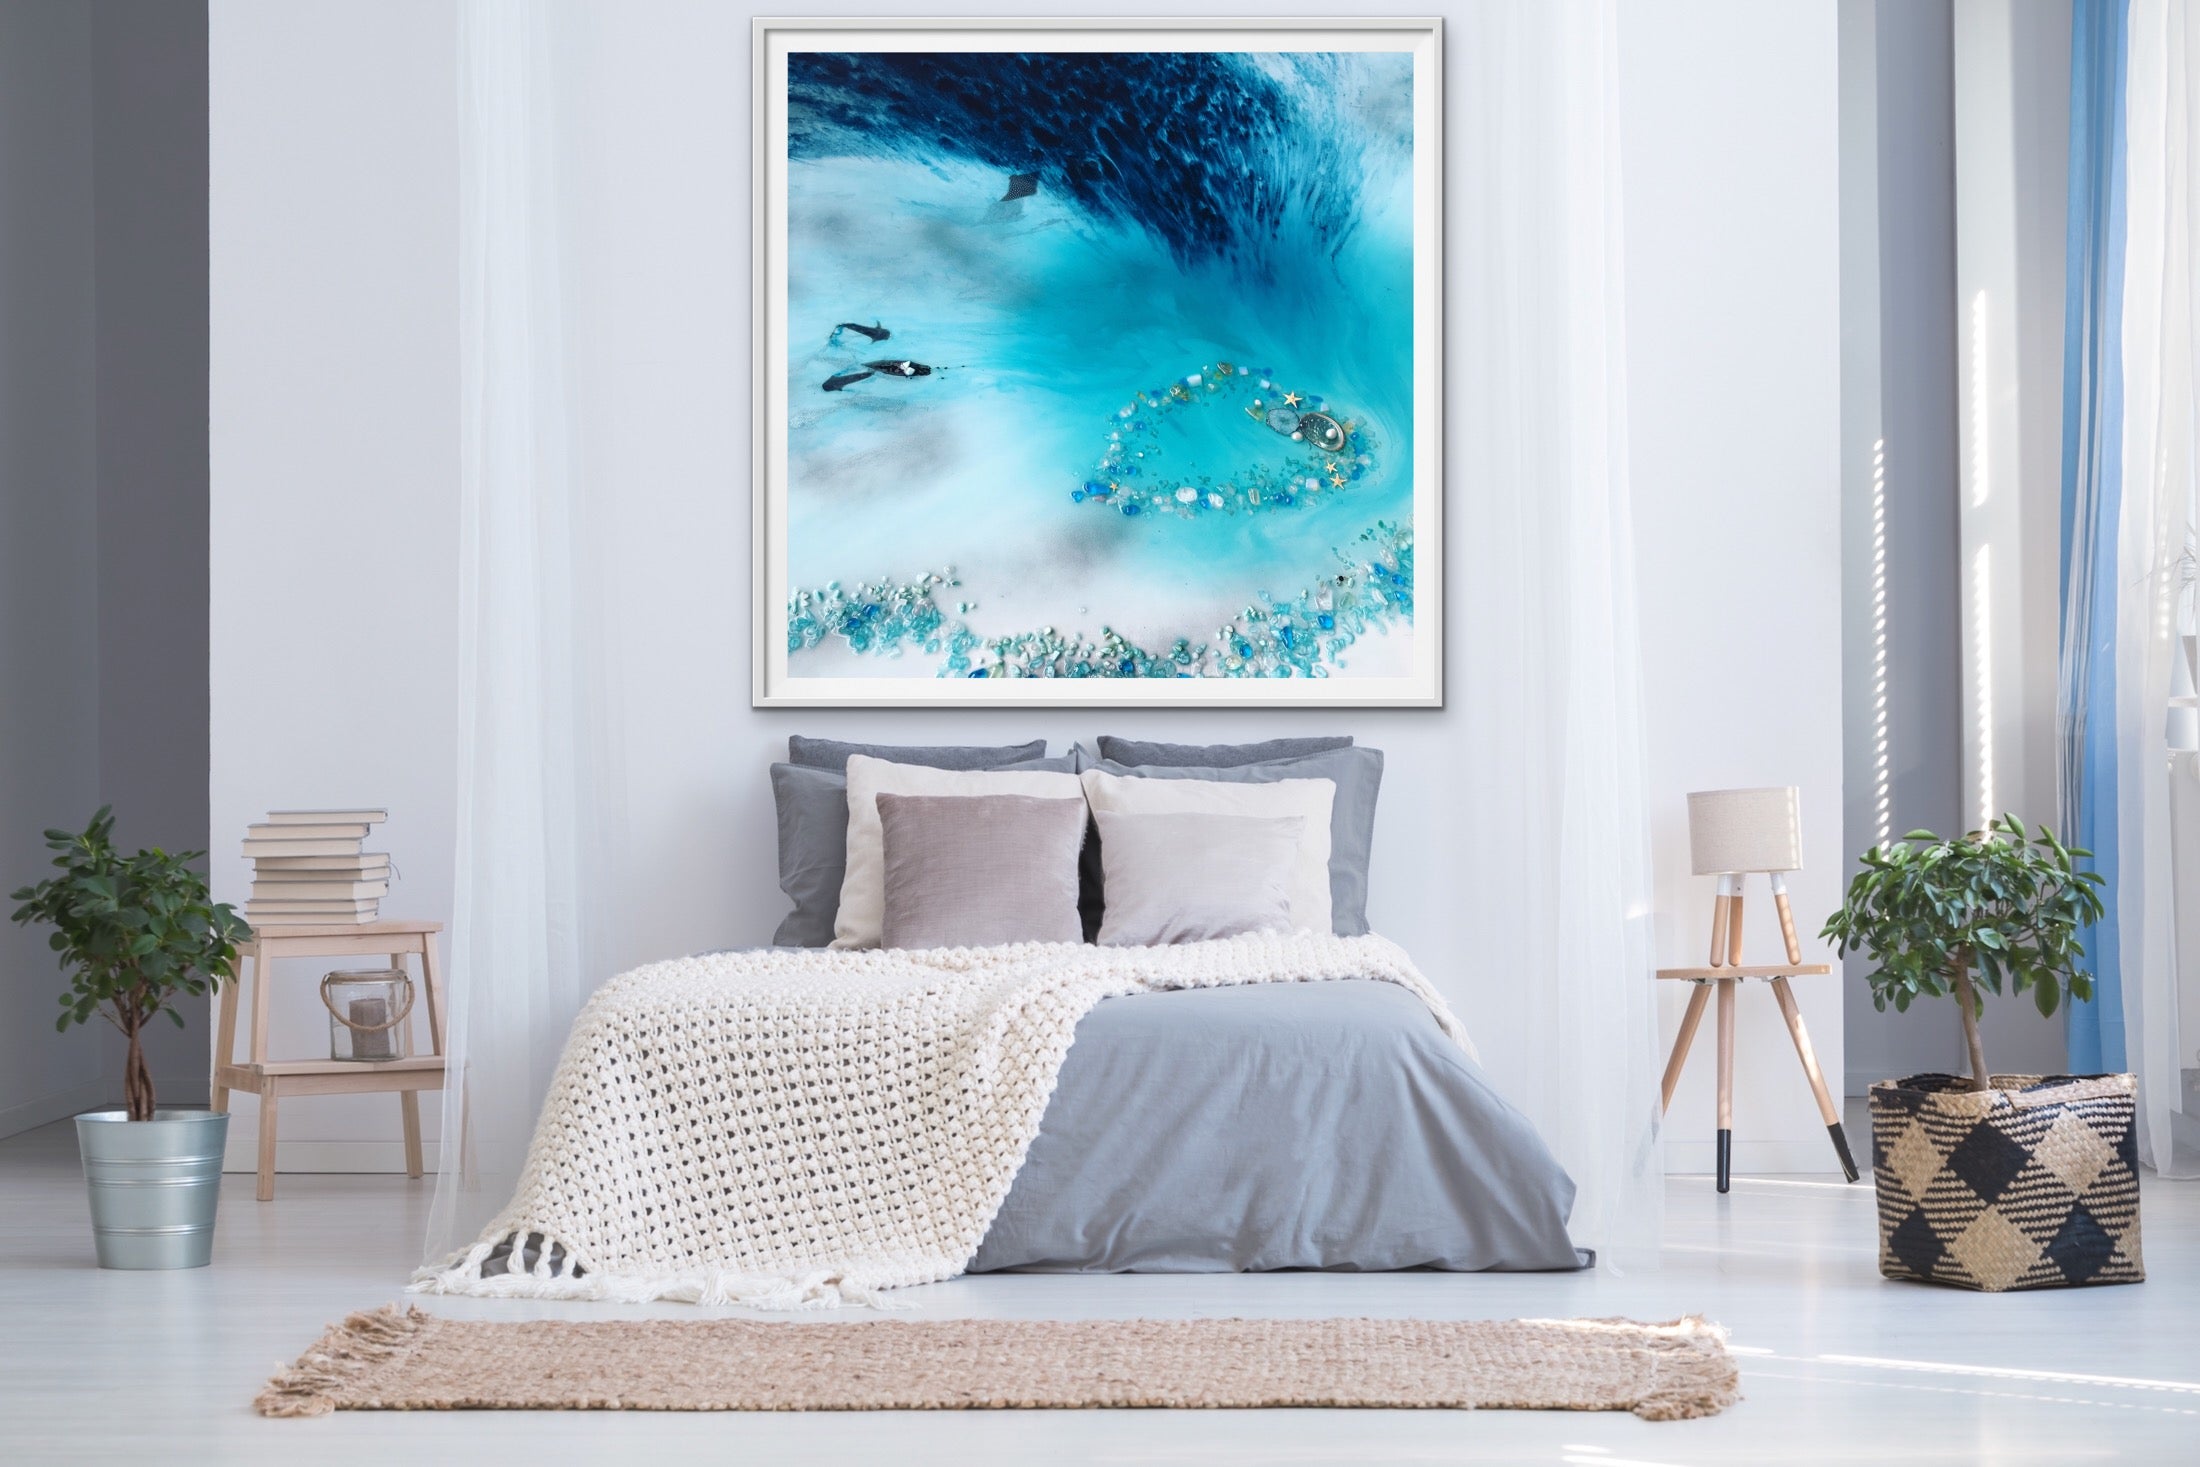 Abstract Seascape. Aqua and Teal. Blue Lagoon. Art Print. Antuanelle 2 Lagoon Tropical Reef Artwork. Limited Edition Print